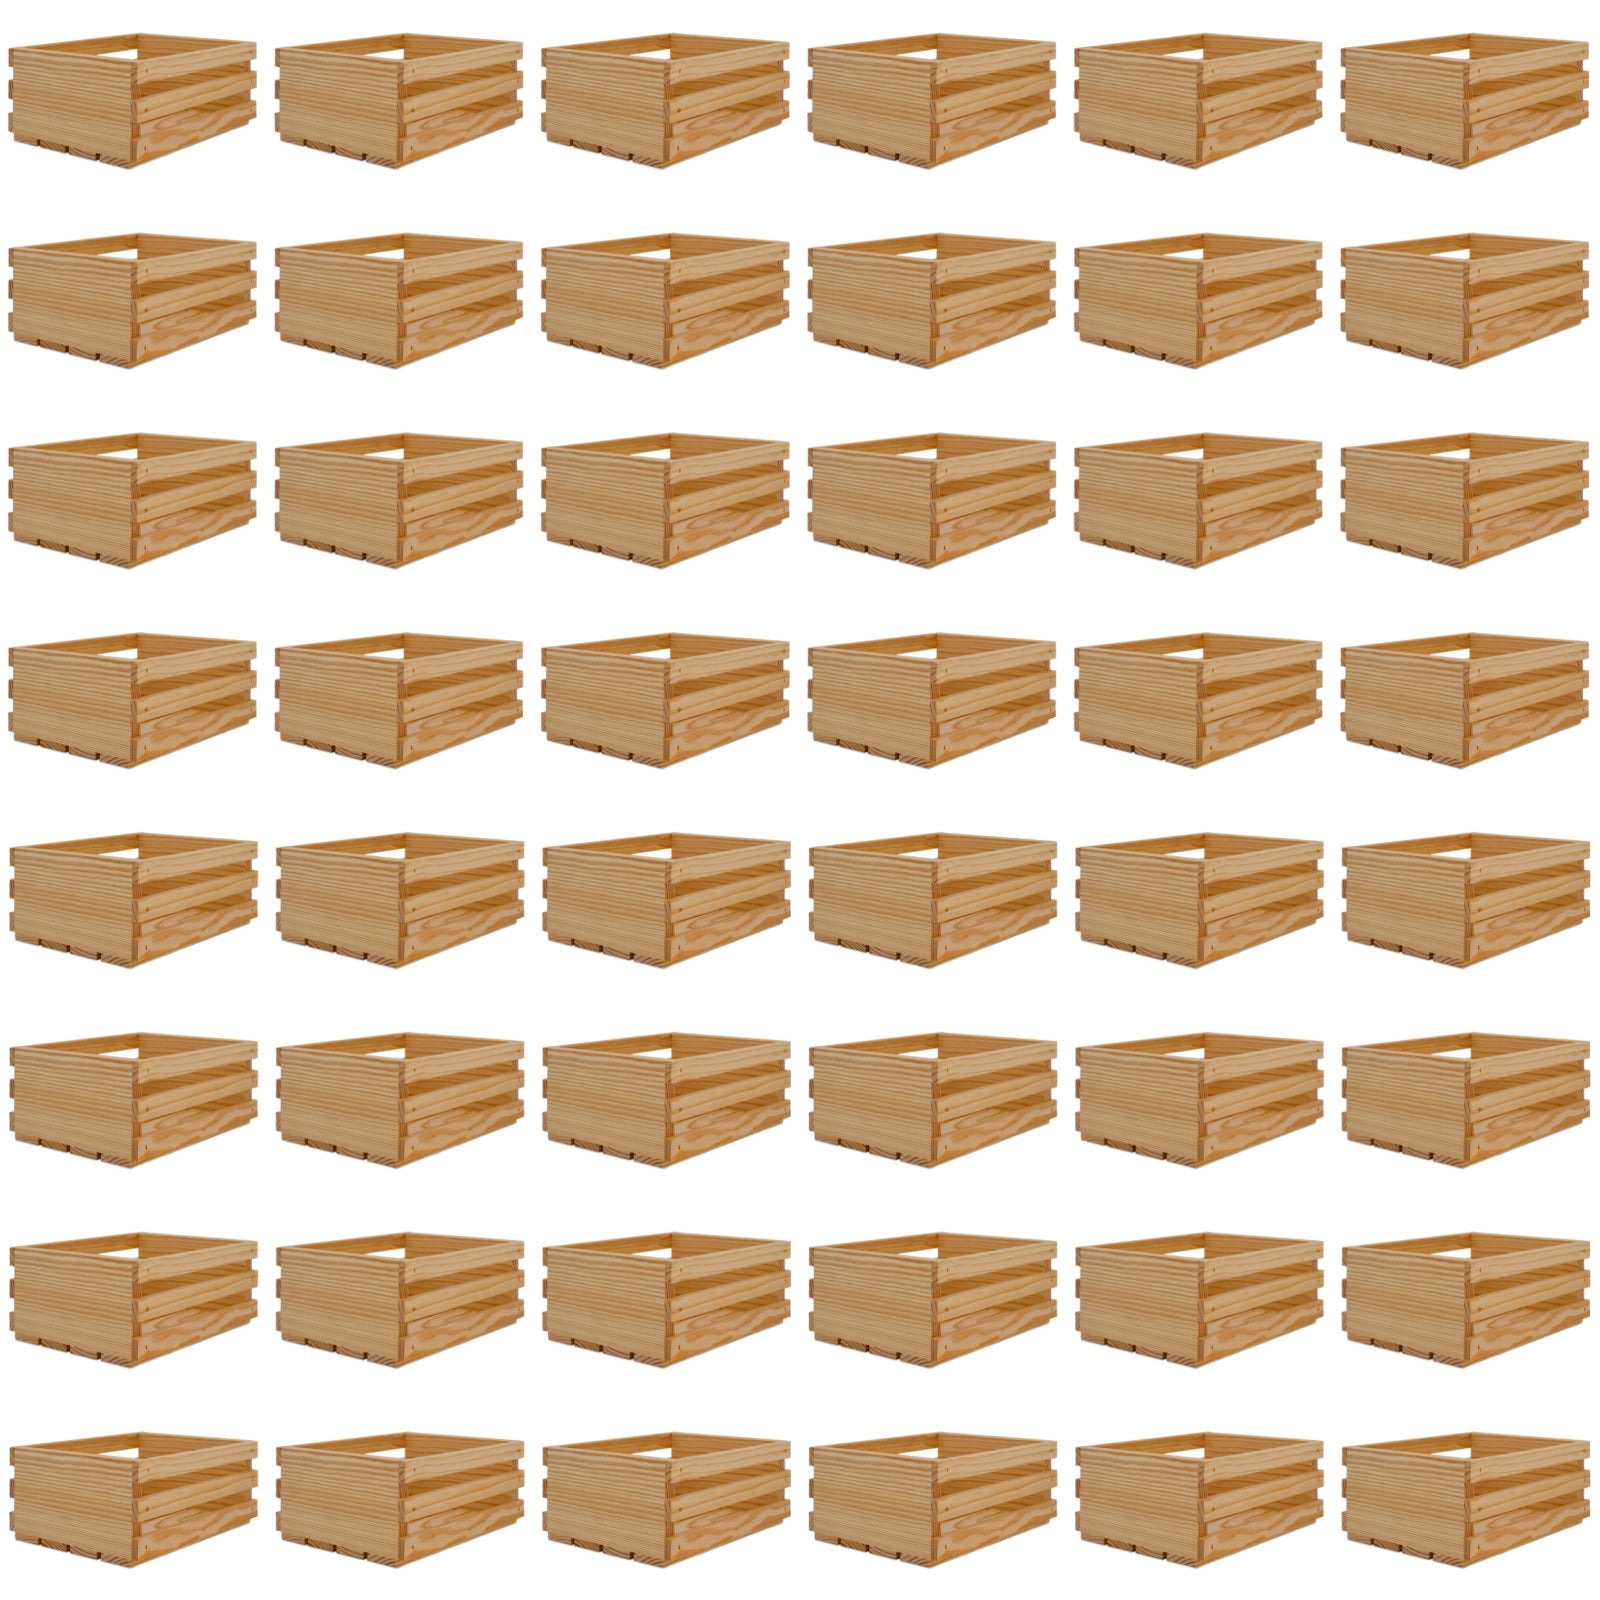 48 Small wooden crates 10x8x4.5, 6-SS-10-8-4.5-NX-NW-NL, 12-SS-10-8-4.5-NX-NW-NL, 24-SS-10-8-4.5-NX-NW-NL, 48-SS-10-8-4.5-NX-NW-NL, 96-SS-10-8-4.5-NX-NW-NL